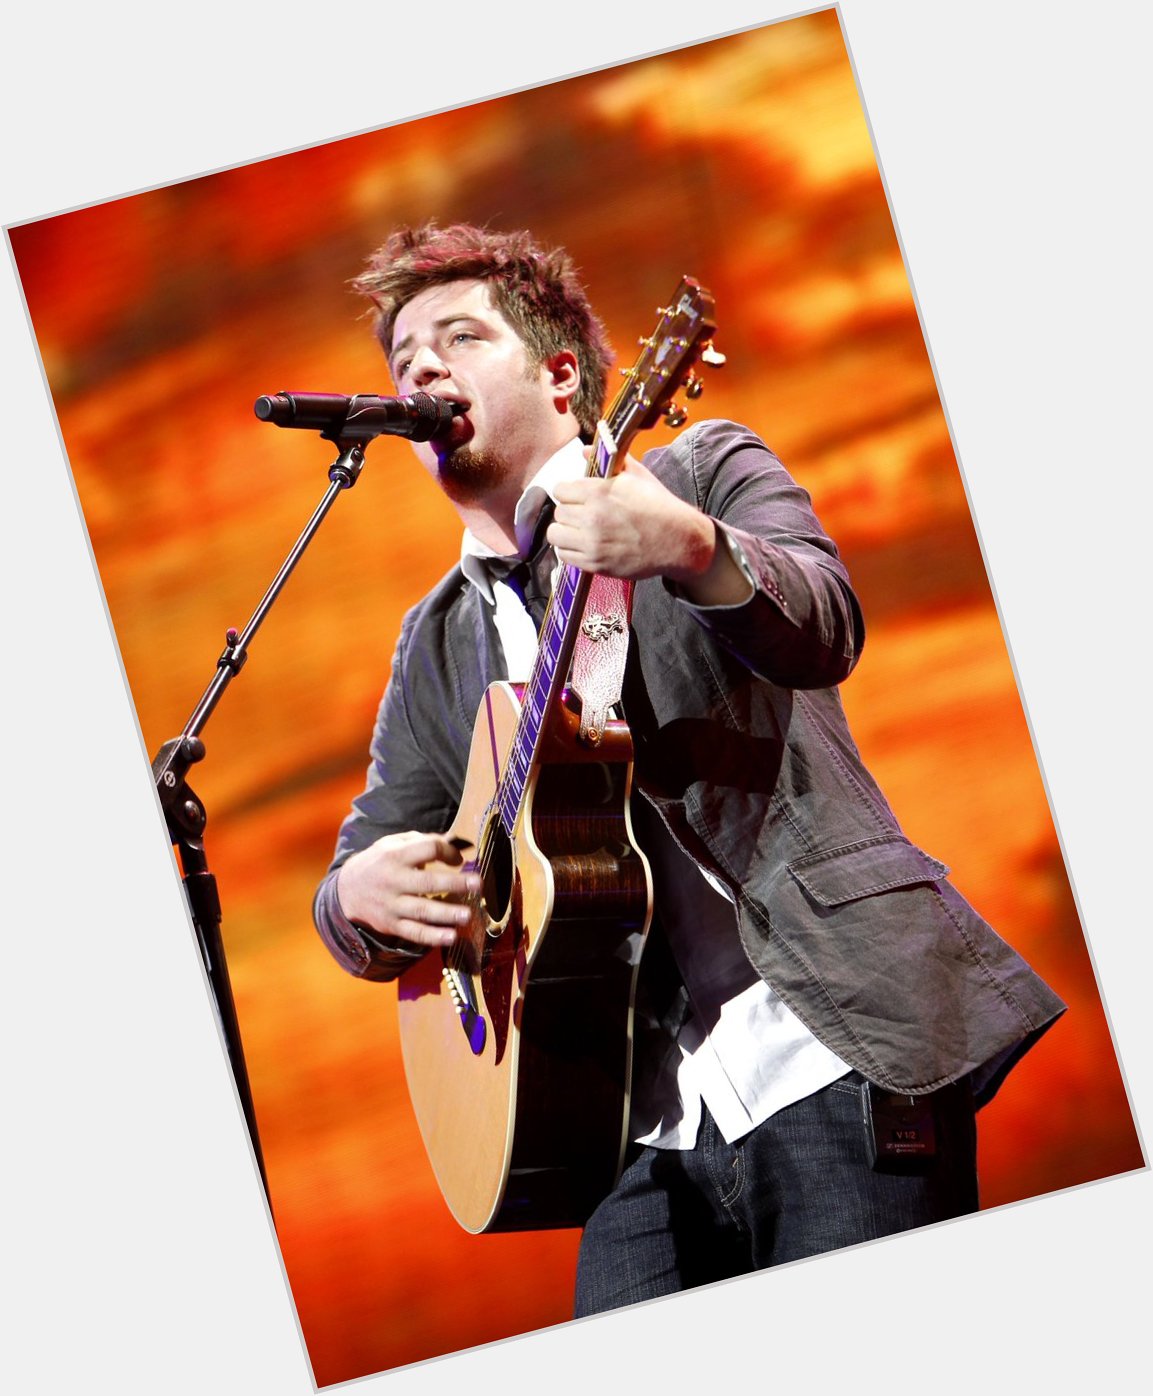 Happy 34th Birthday to singer-songwriter and the winner of the 9th season of American Idol, Lee DeWyze! 